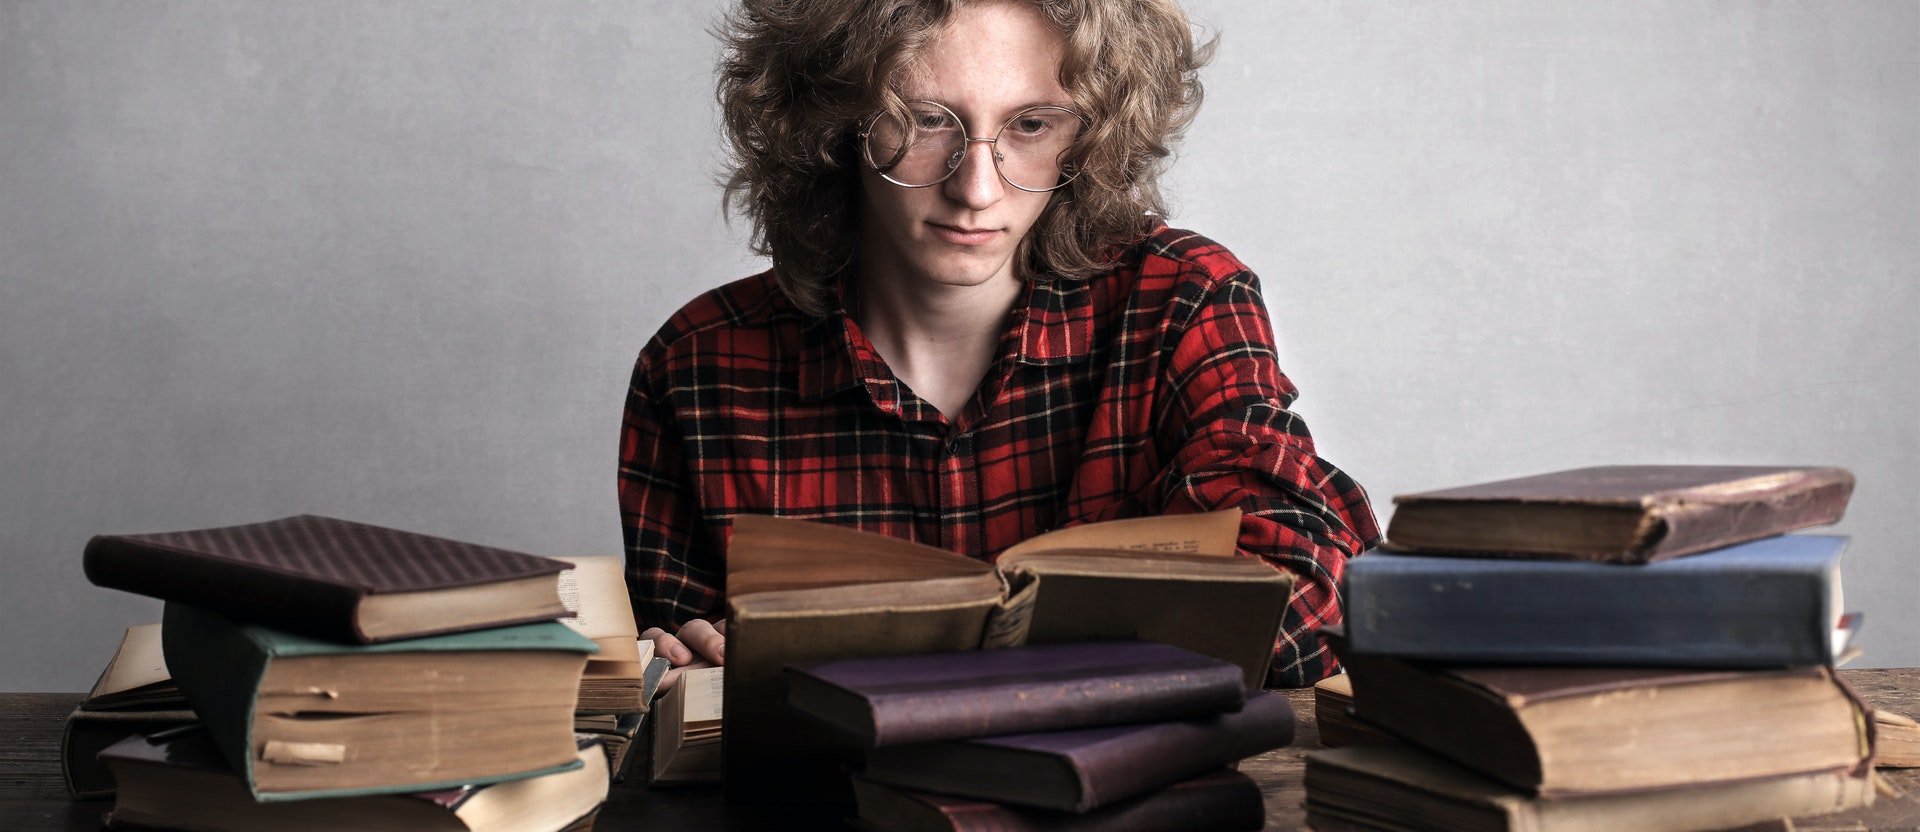 A person reading old books